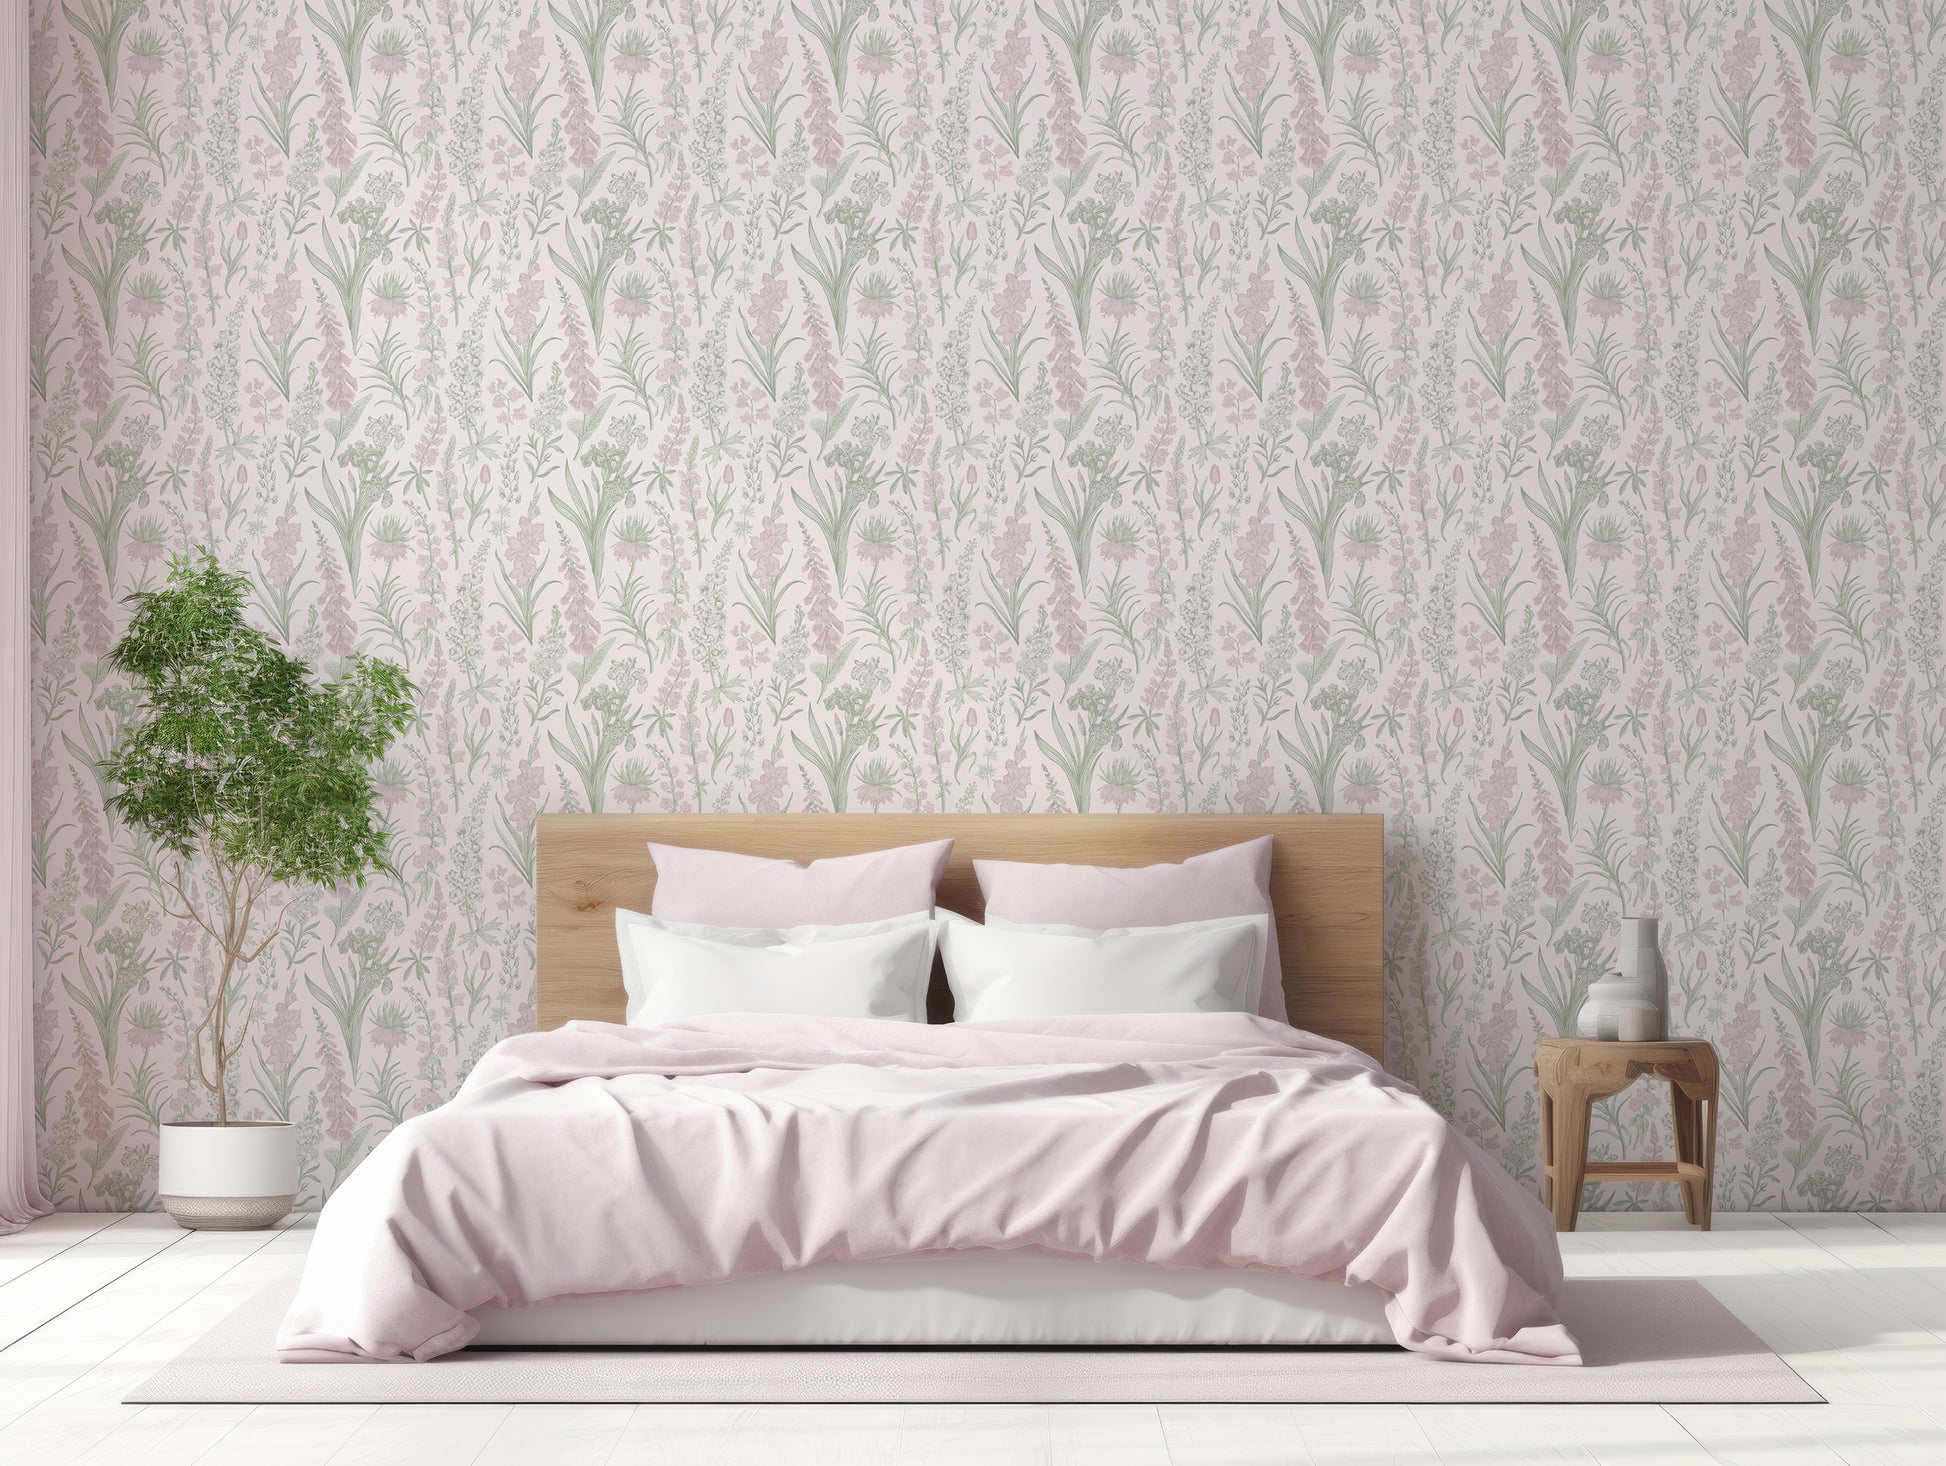 Esther Wallpaper In Bedroom With Wooden Framed Bed With White & Pink Bedding